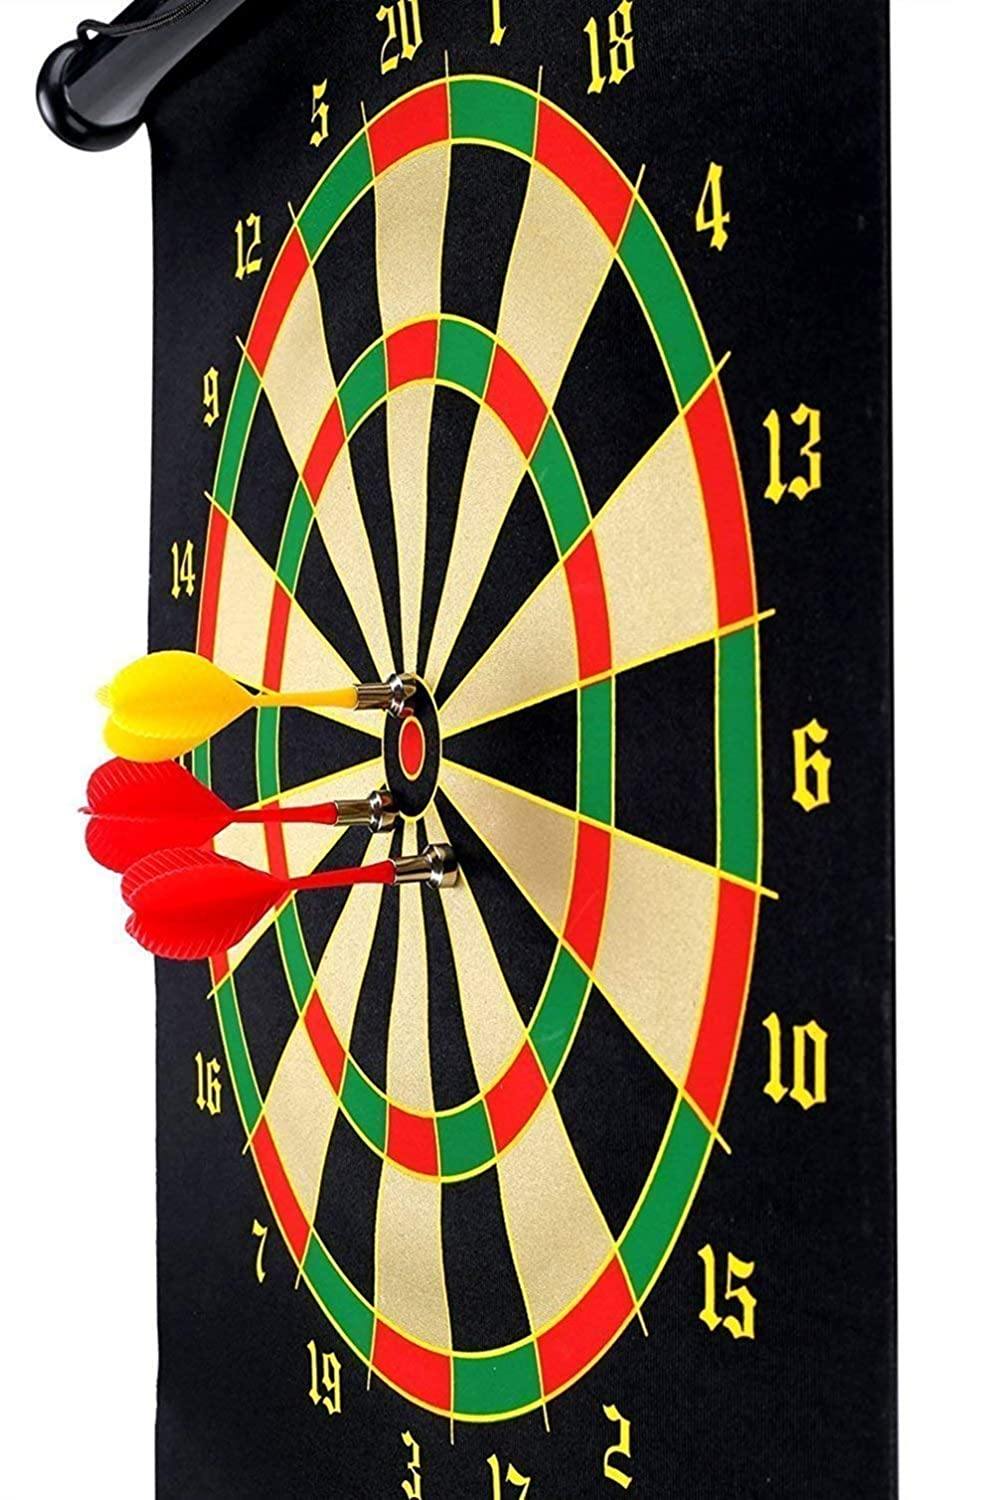 Prokick High Magnetic Power with Double Faced Portable and Foldable Dart Game with 6 Colourful Non Pointed Darts for Kids 20-Inch - Best Price online Prokicksports.com